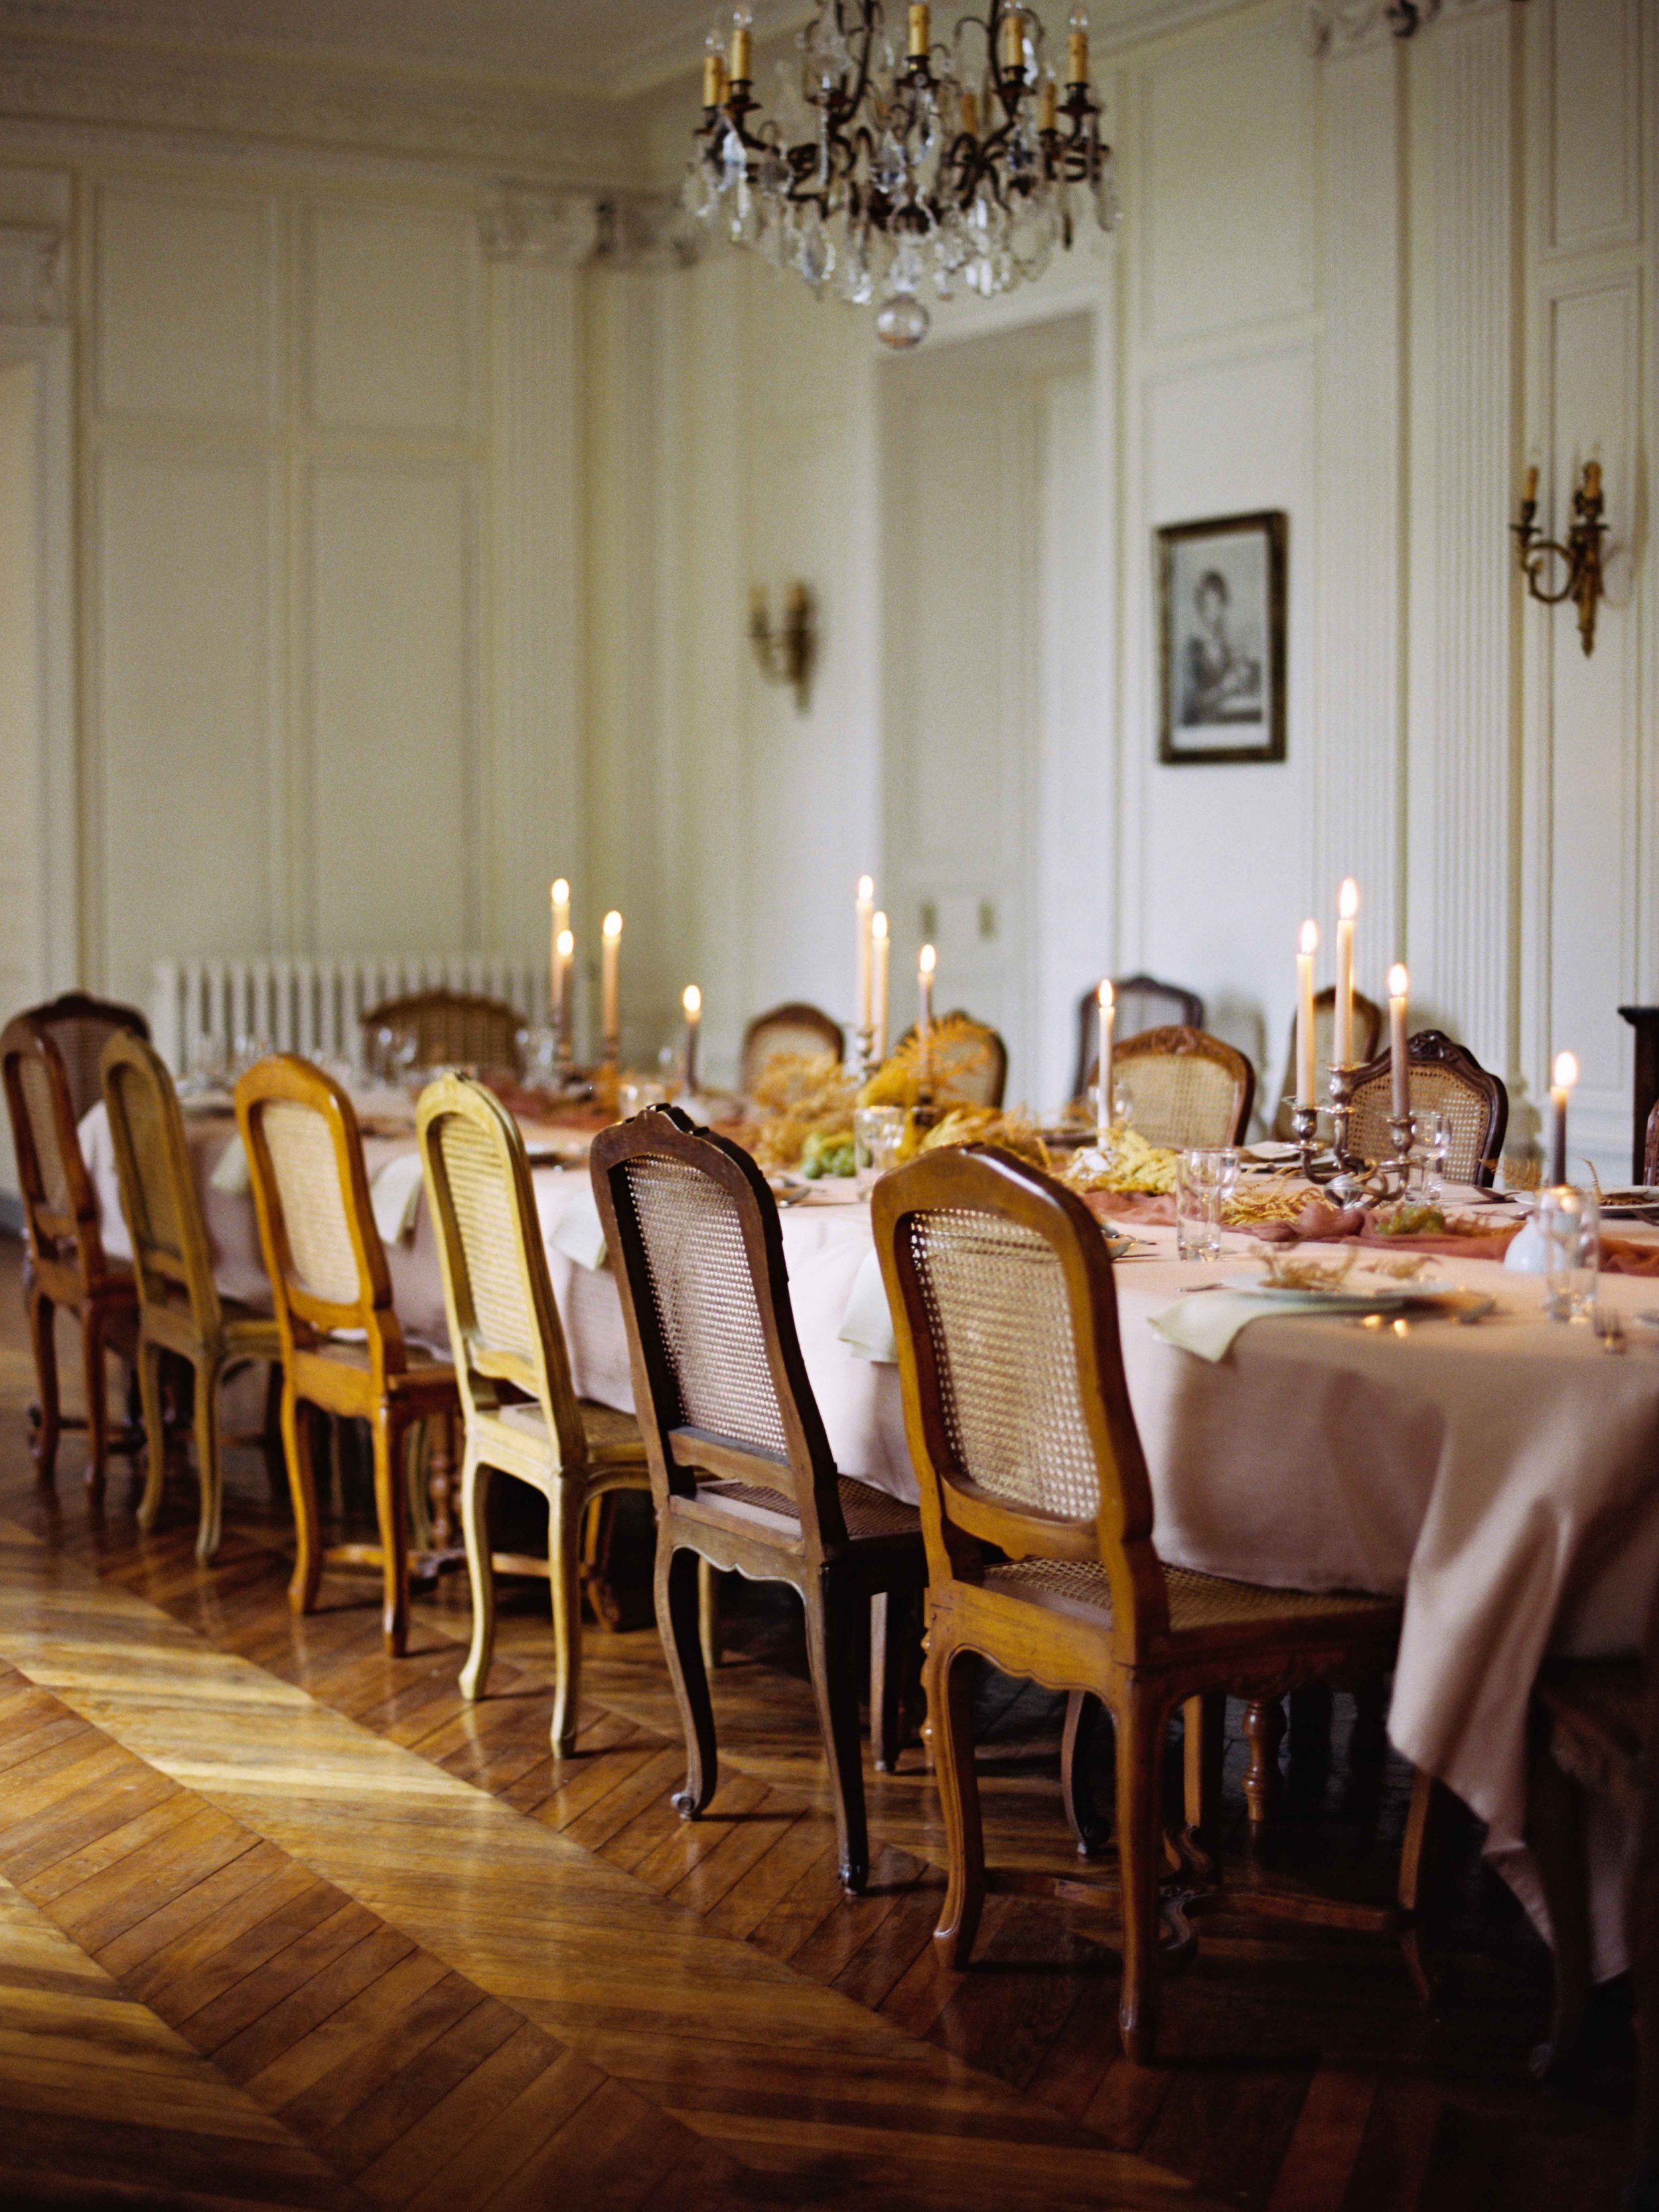 An elegant table setting with candles on it, ready for guest staying at Chateau de Courtomer during a workshop.